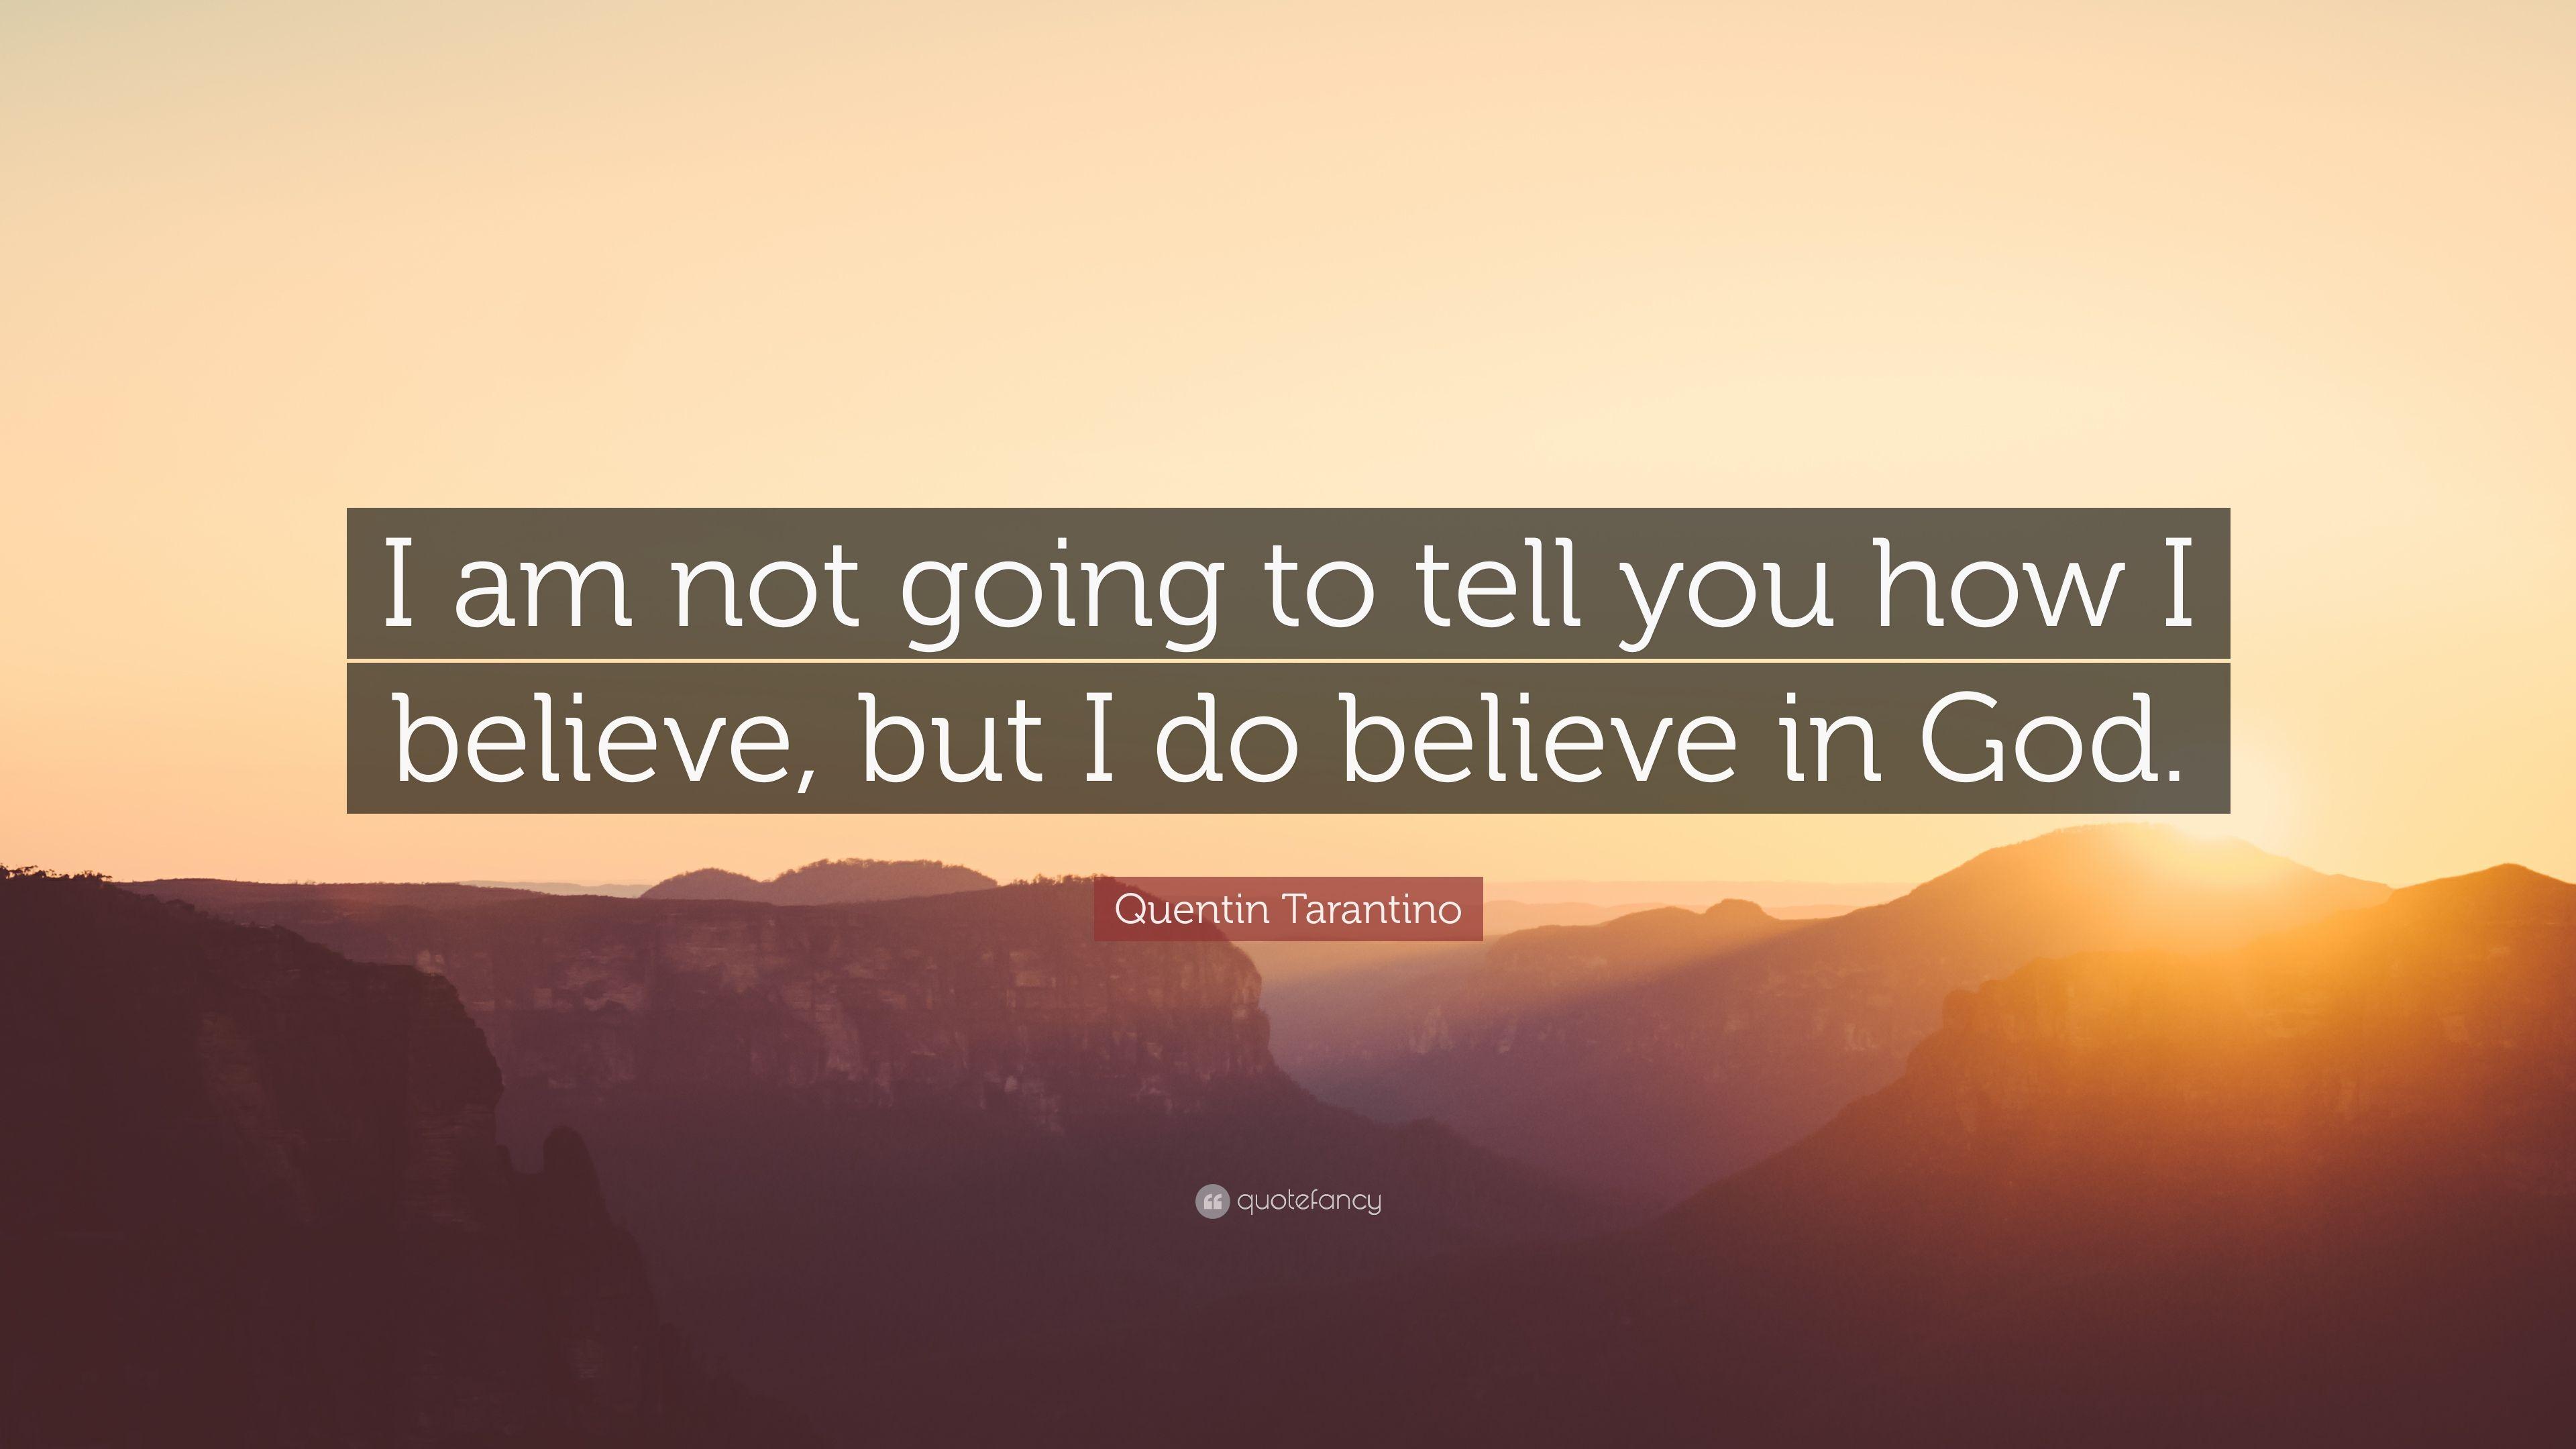 Quentin Tarantino Quote: “I am not going to tell you how I believe